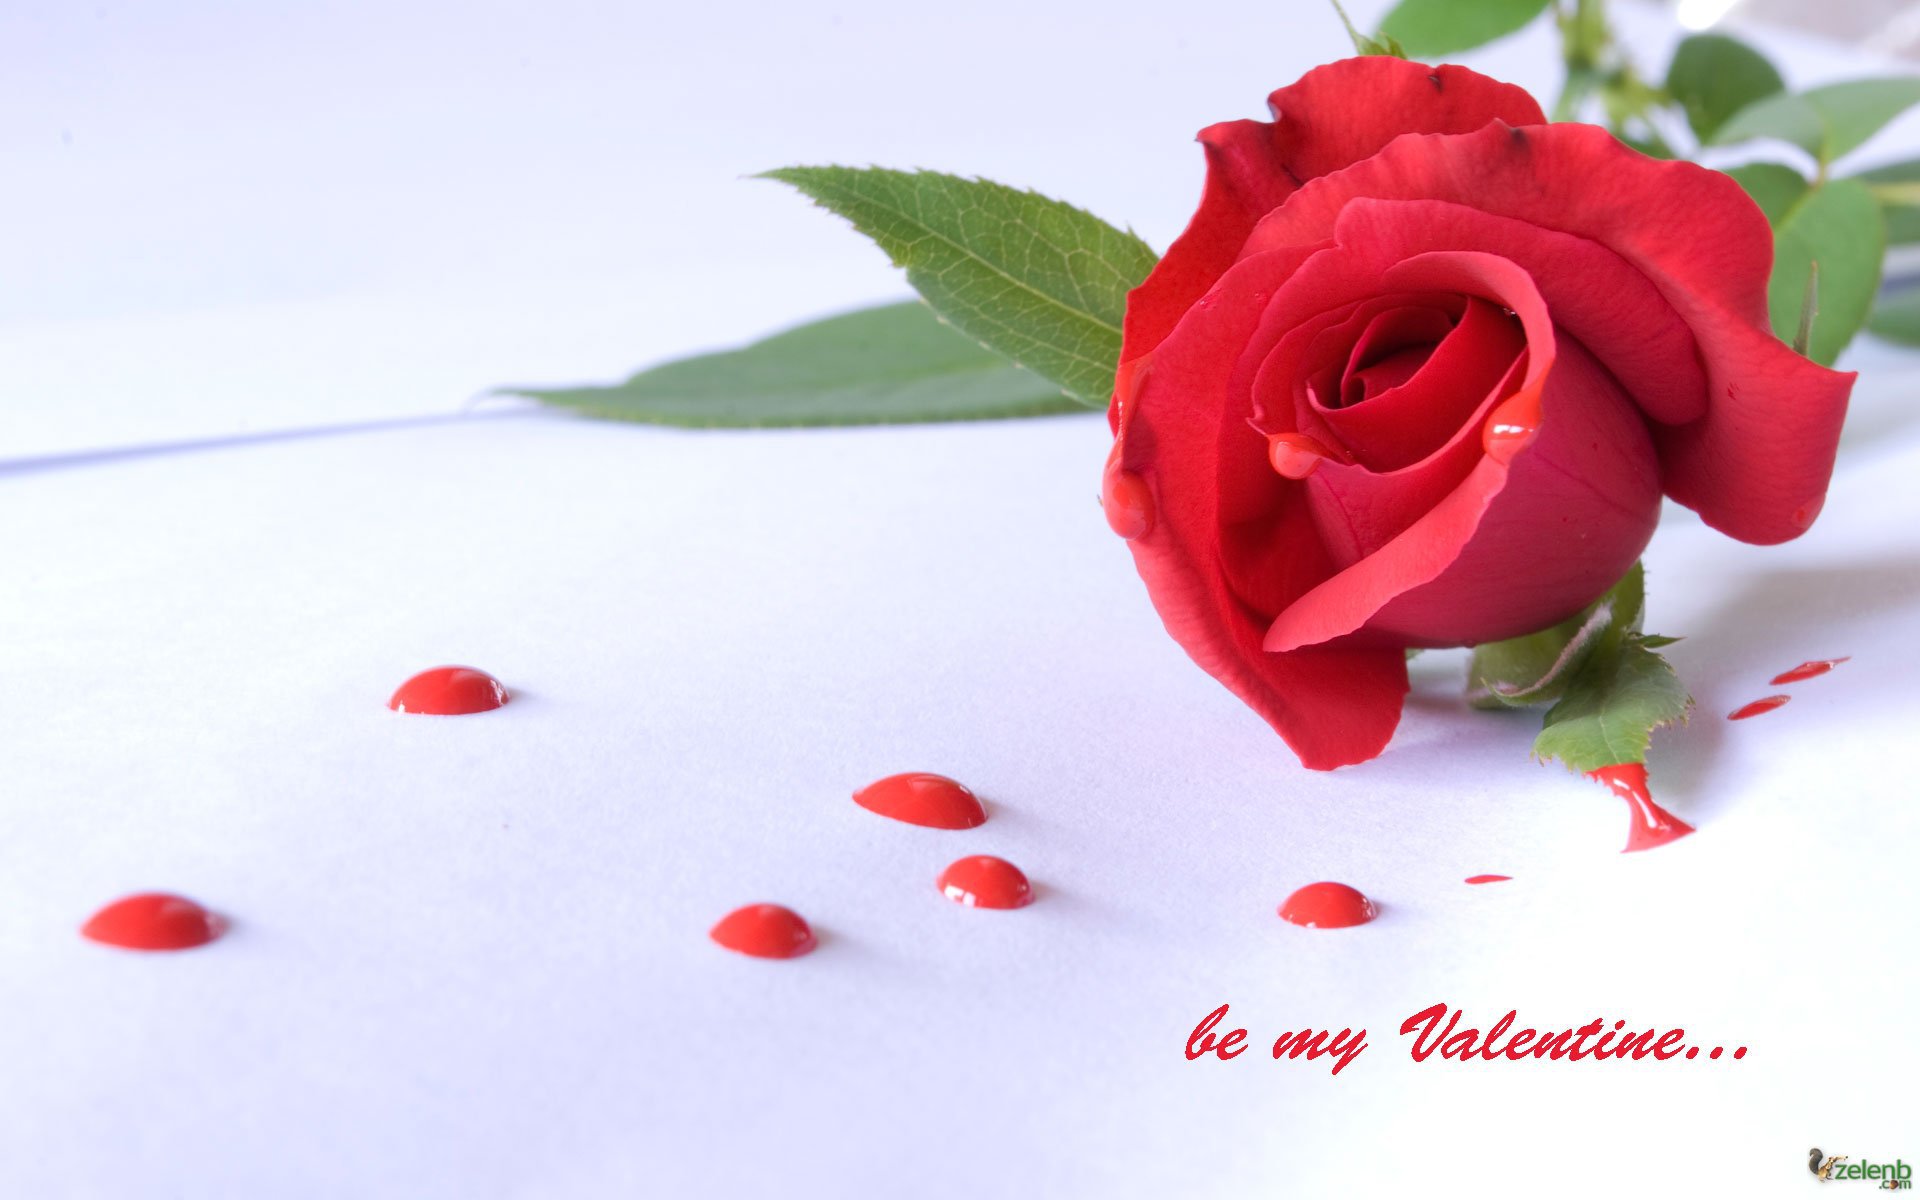 Holidays___Saint_Valentines_Day_Rose_and_drops_on_Valentine_s_Day_February_14_061361_